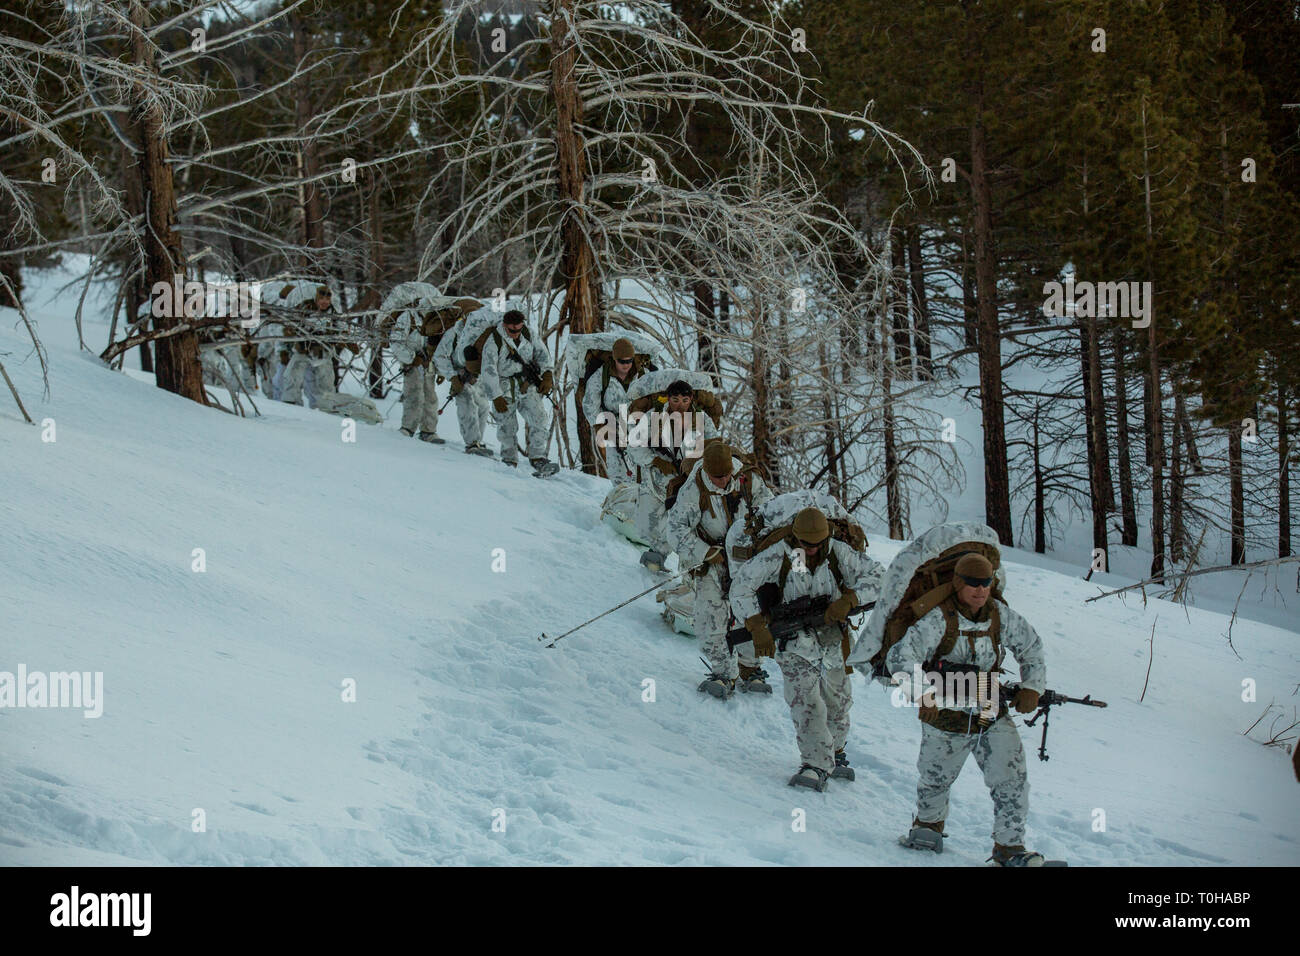 U.S. Marines with Company E, 2nd Battalion, 6th Marine Regiment, 2nd Marine Division conduct a tactical patrol during Mountain Training Exercise (MTX) 2-19 at Marine Corps Mountain Warfare Training Center, Bridgeport, Calif., March 16, 2019. Marines with Company E work on maneuvering techniques in snowy mountainous terrain. (U.S. Marine Corps photo by Lance Cpl. Tyler M. Solak) Stock Photo